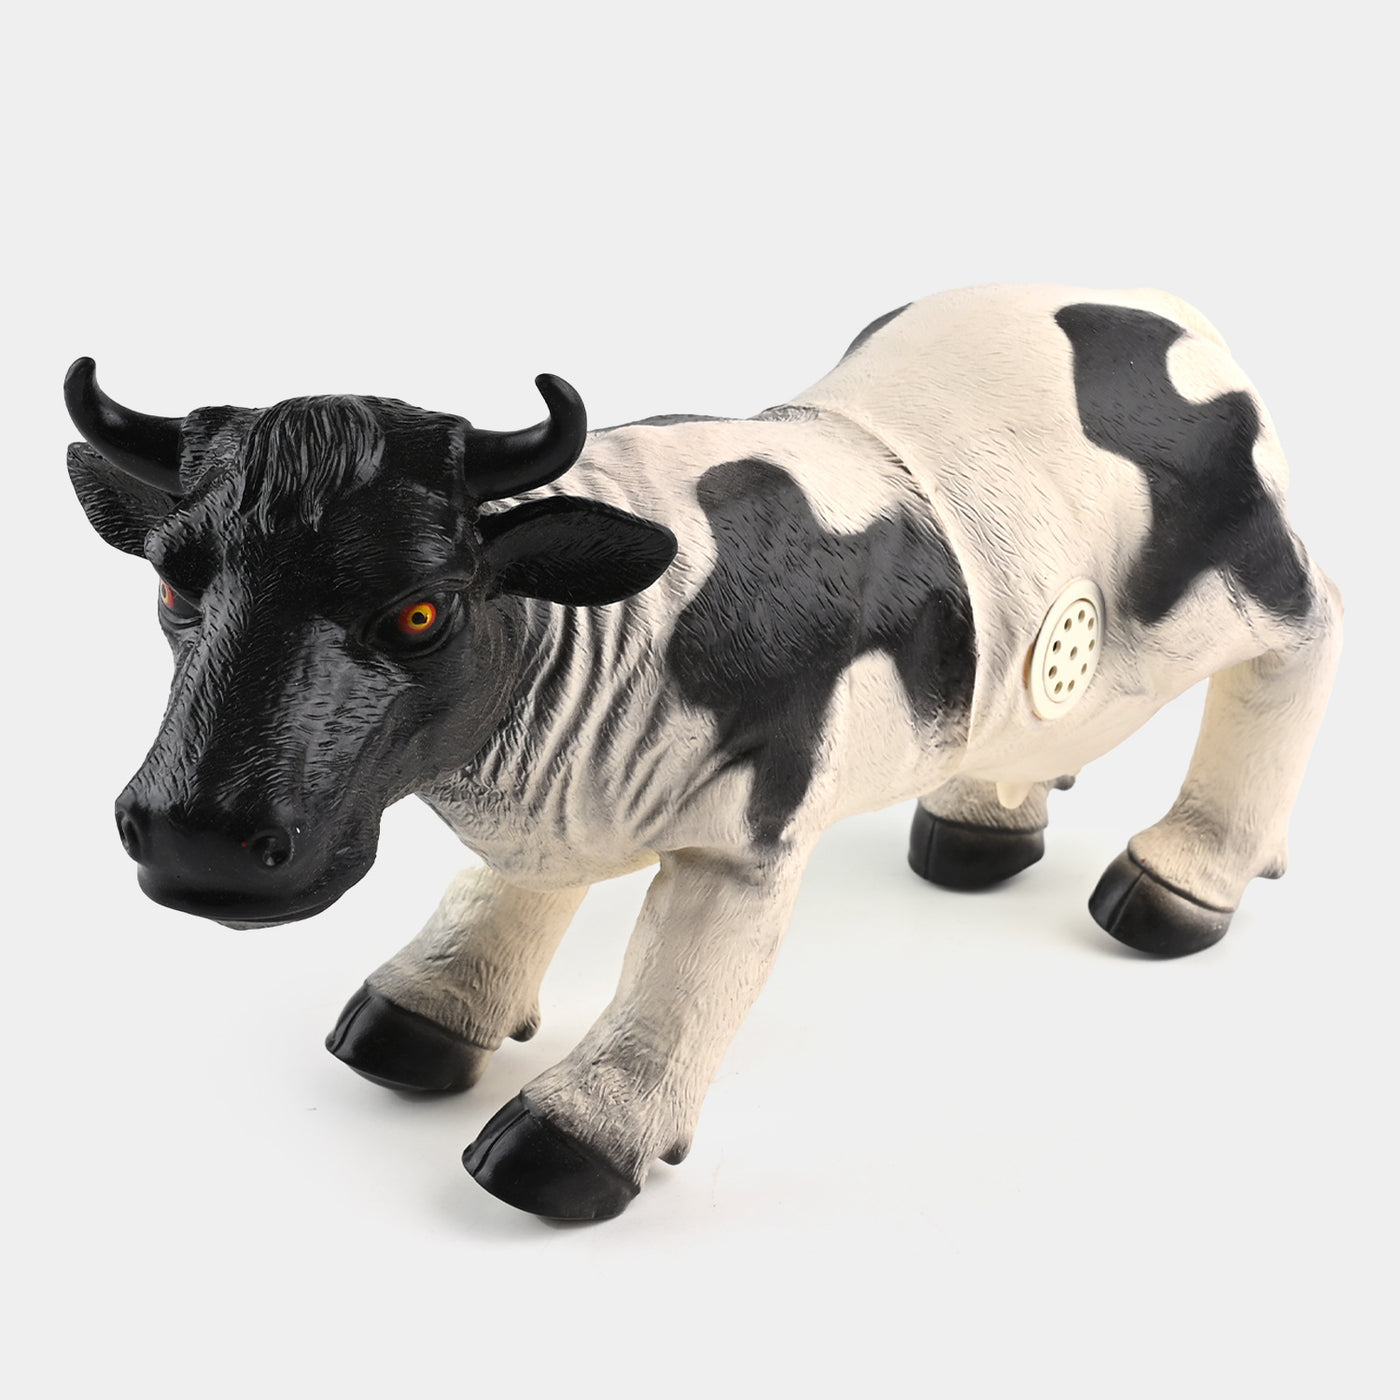 Rubber Farm Cow With Sound Toy For Kids